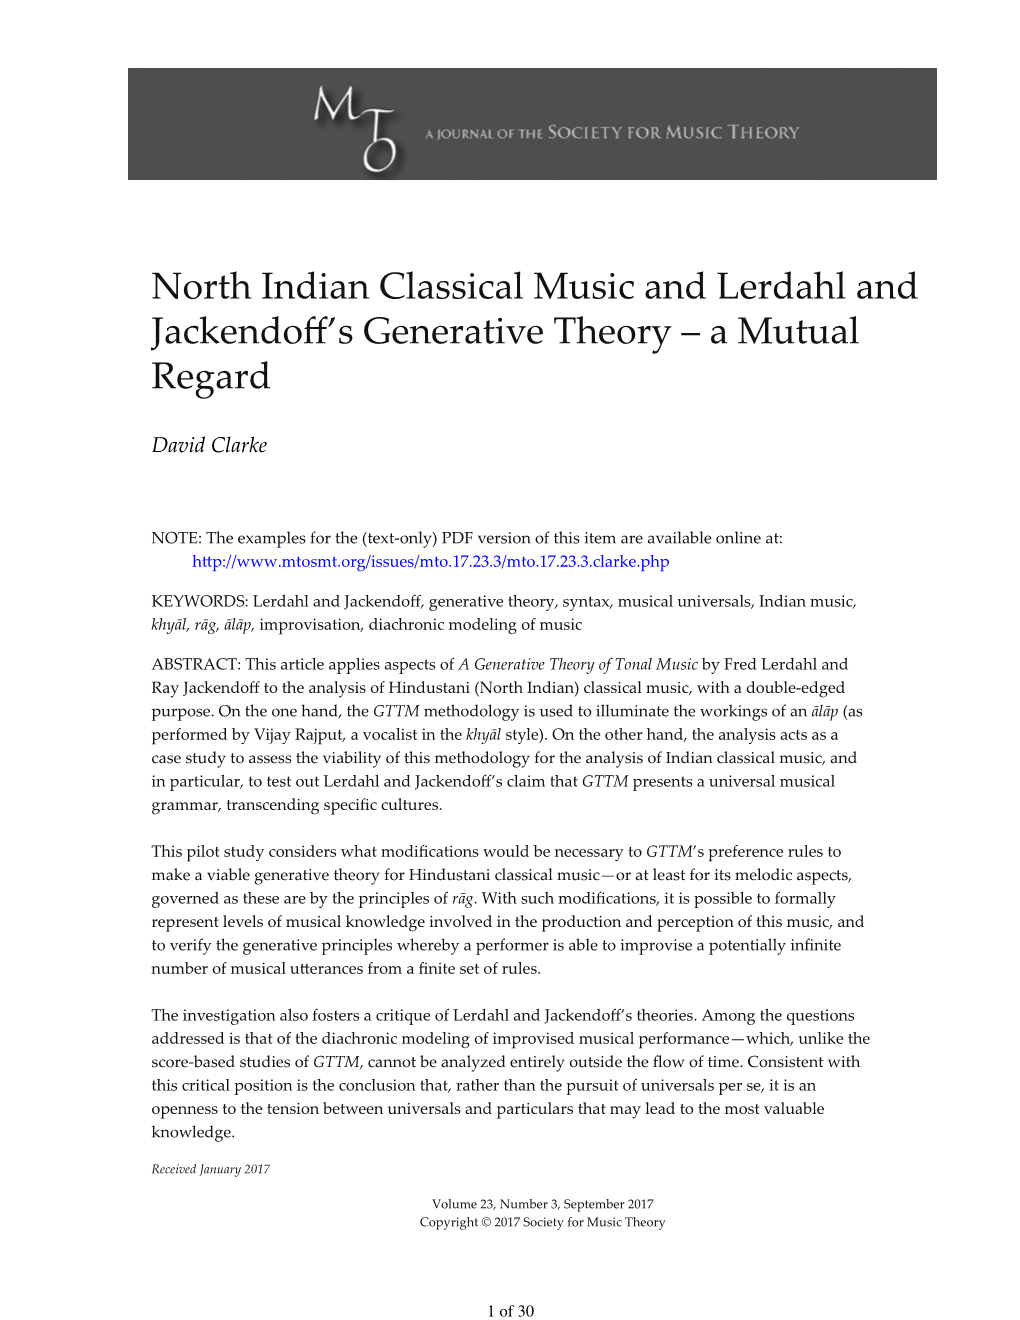 Clarke, North Indian Classical Music and Lerdahl and Jackendoff